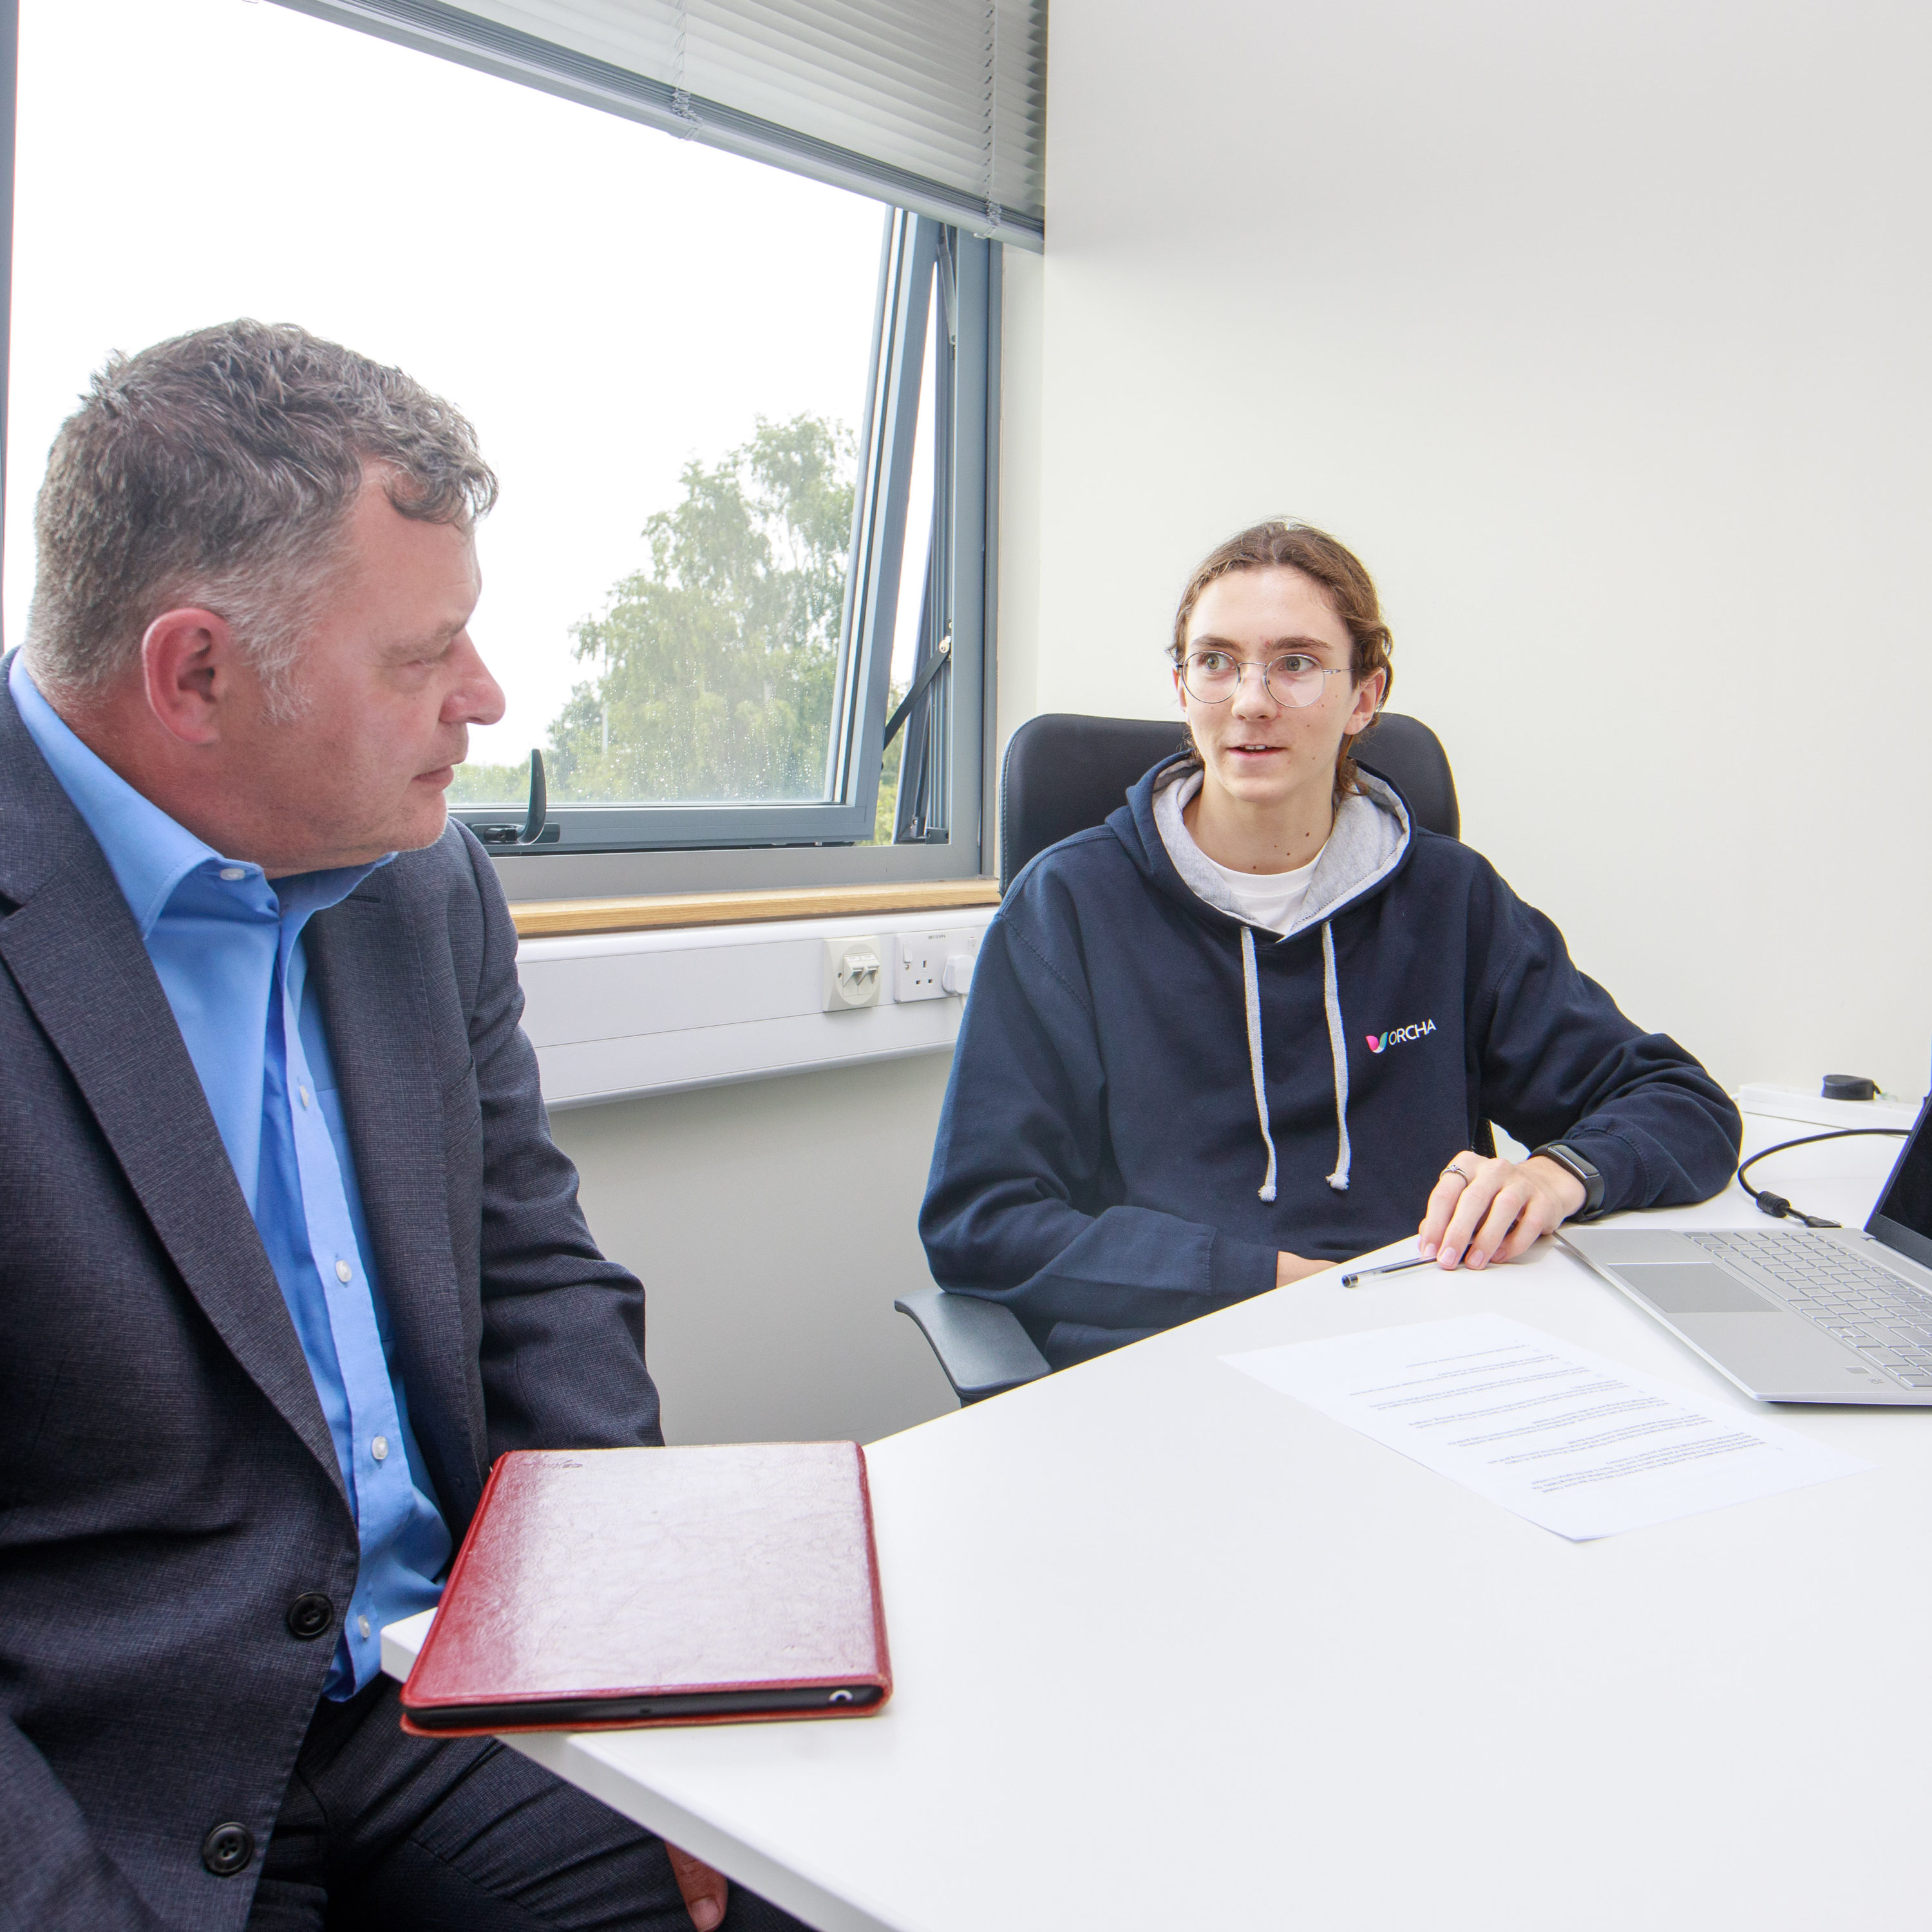 Mike Amesbury MP in discussion with Work Experience Student James McCann